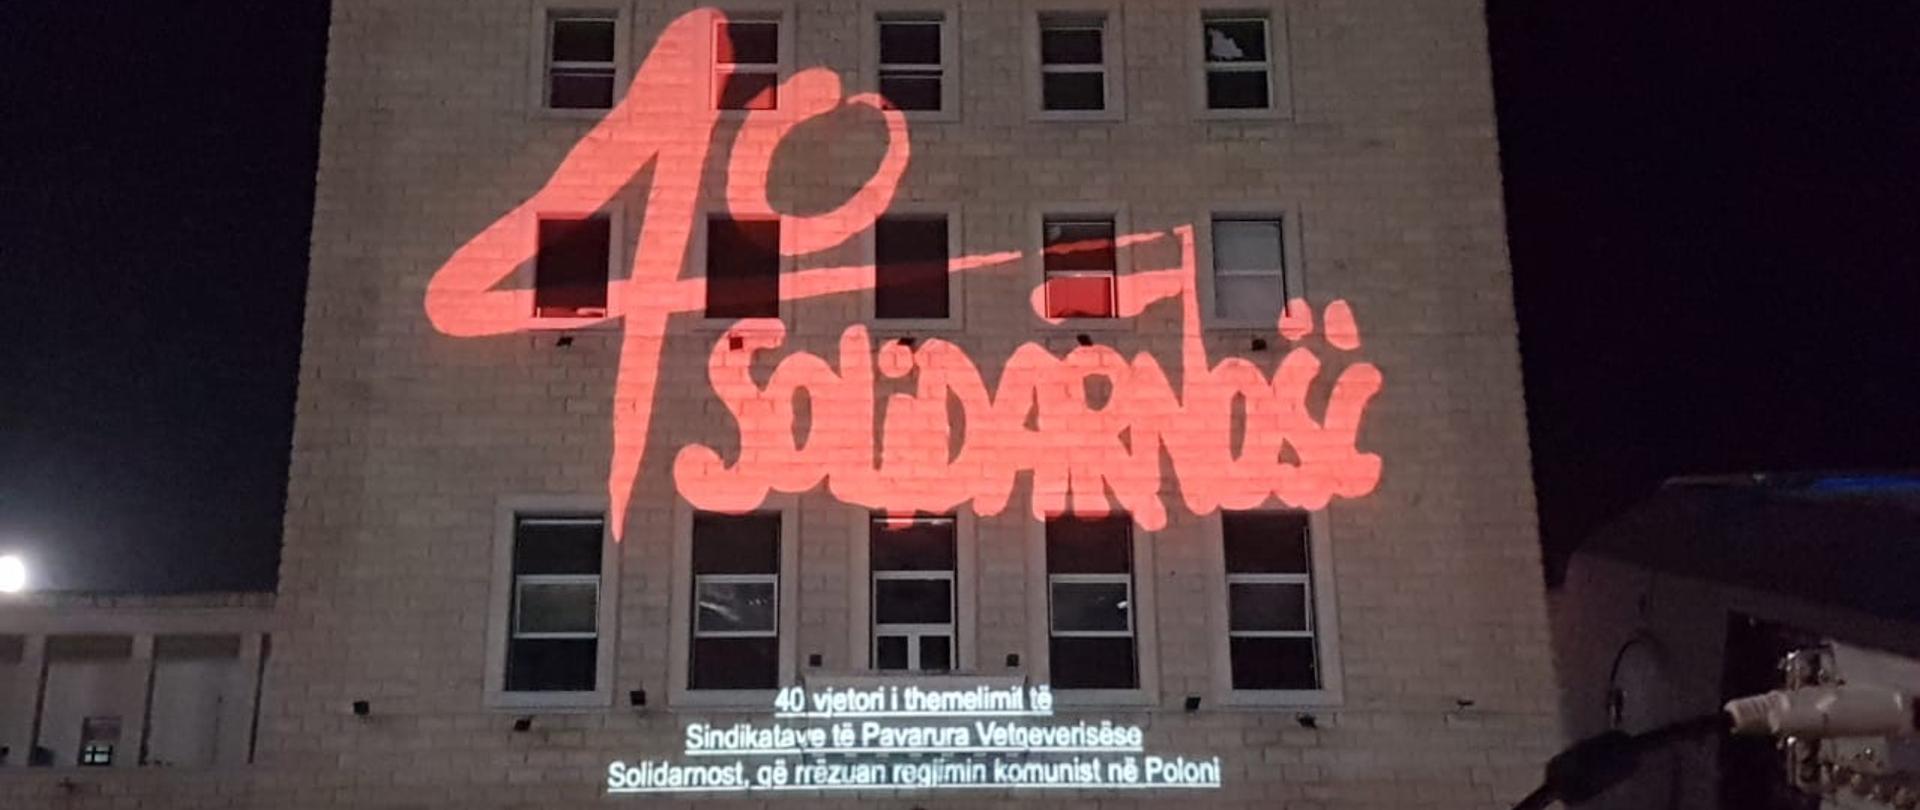 On the occasion of the 40th Anniversary of signing the August Agreements the Polytechnic of Tirana in Albania was illuminated in the national colours of the Republic of Poland as well as the logo of the "40th anniversary of Solidarity Movement”.